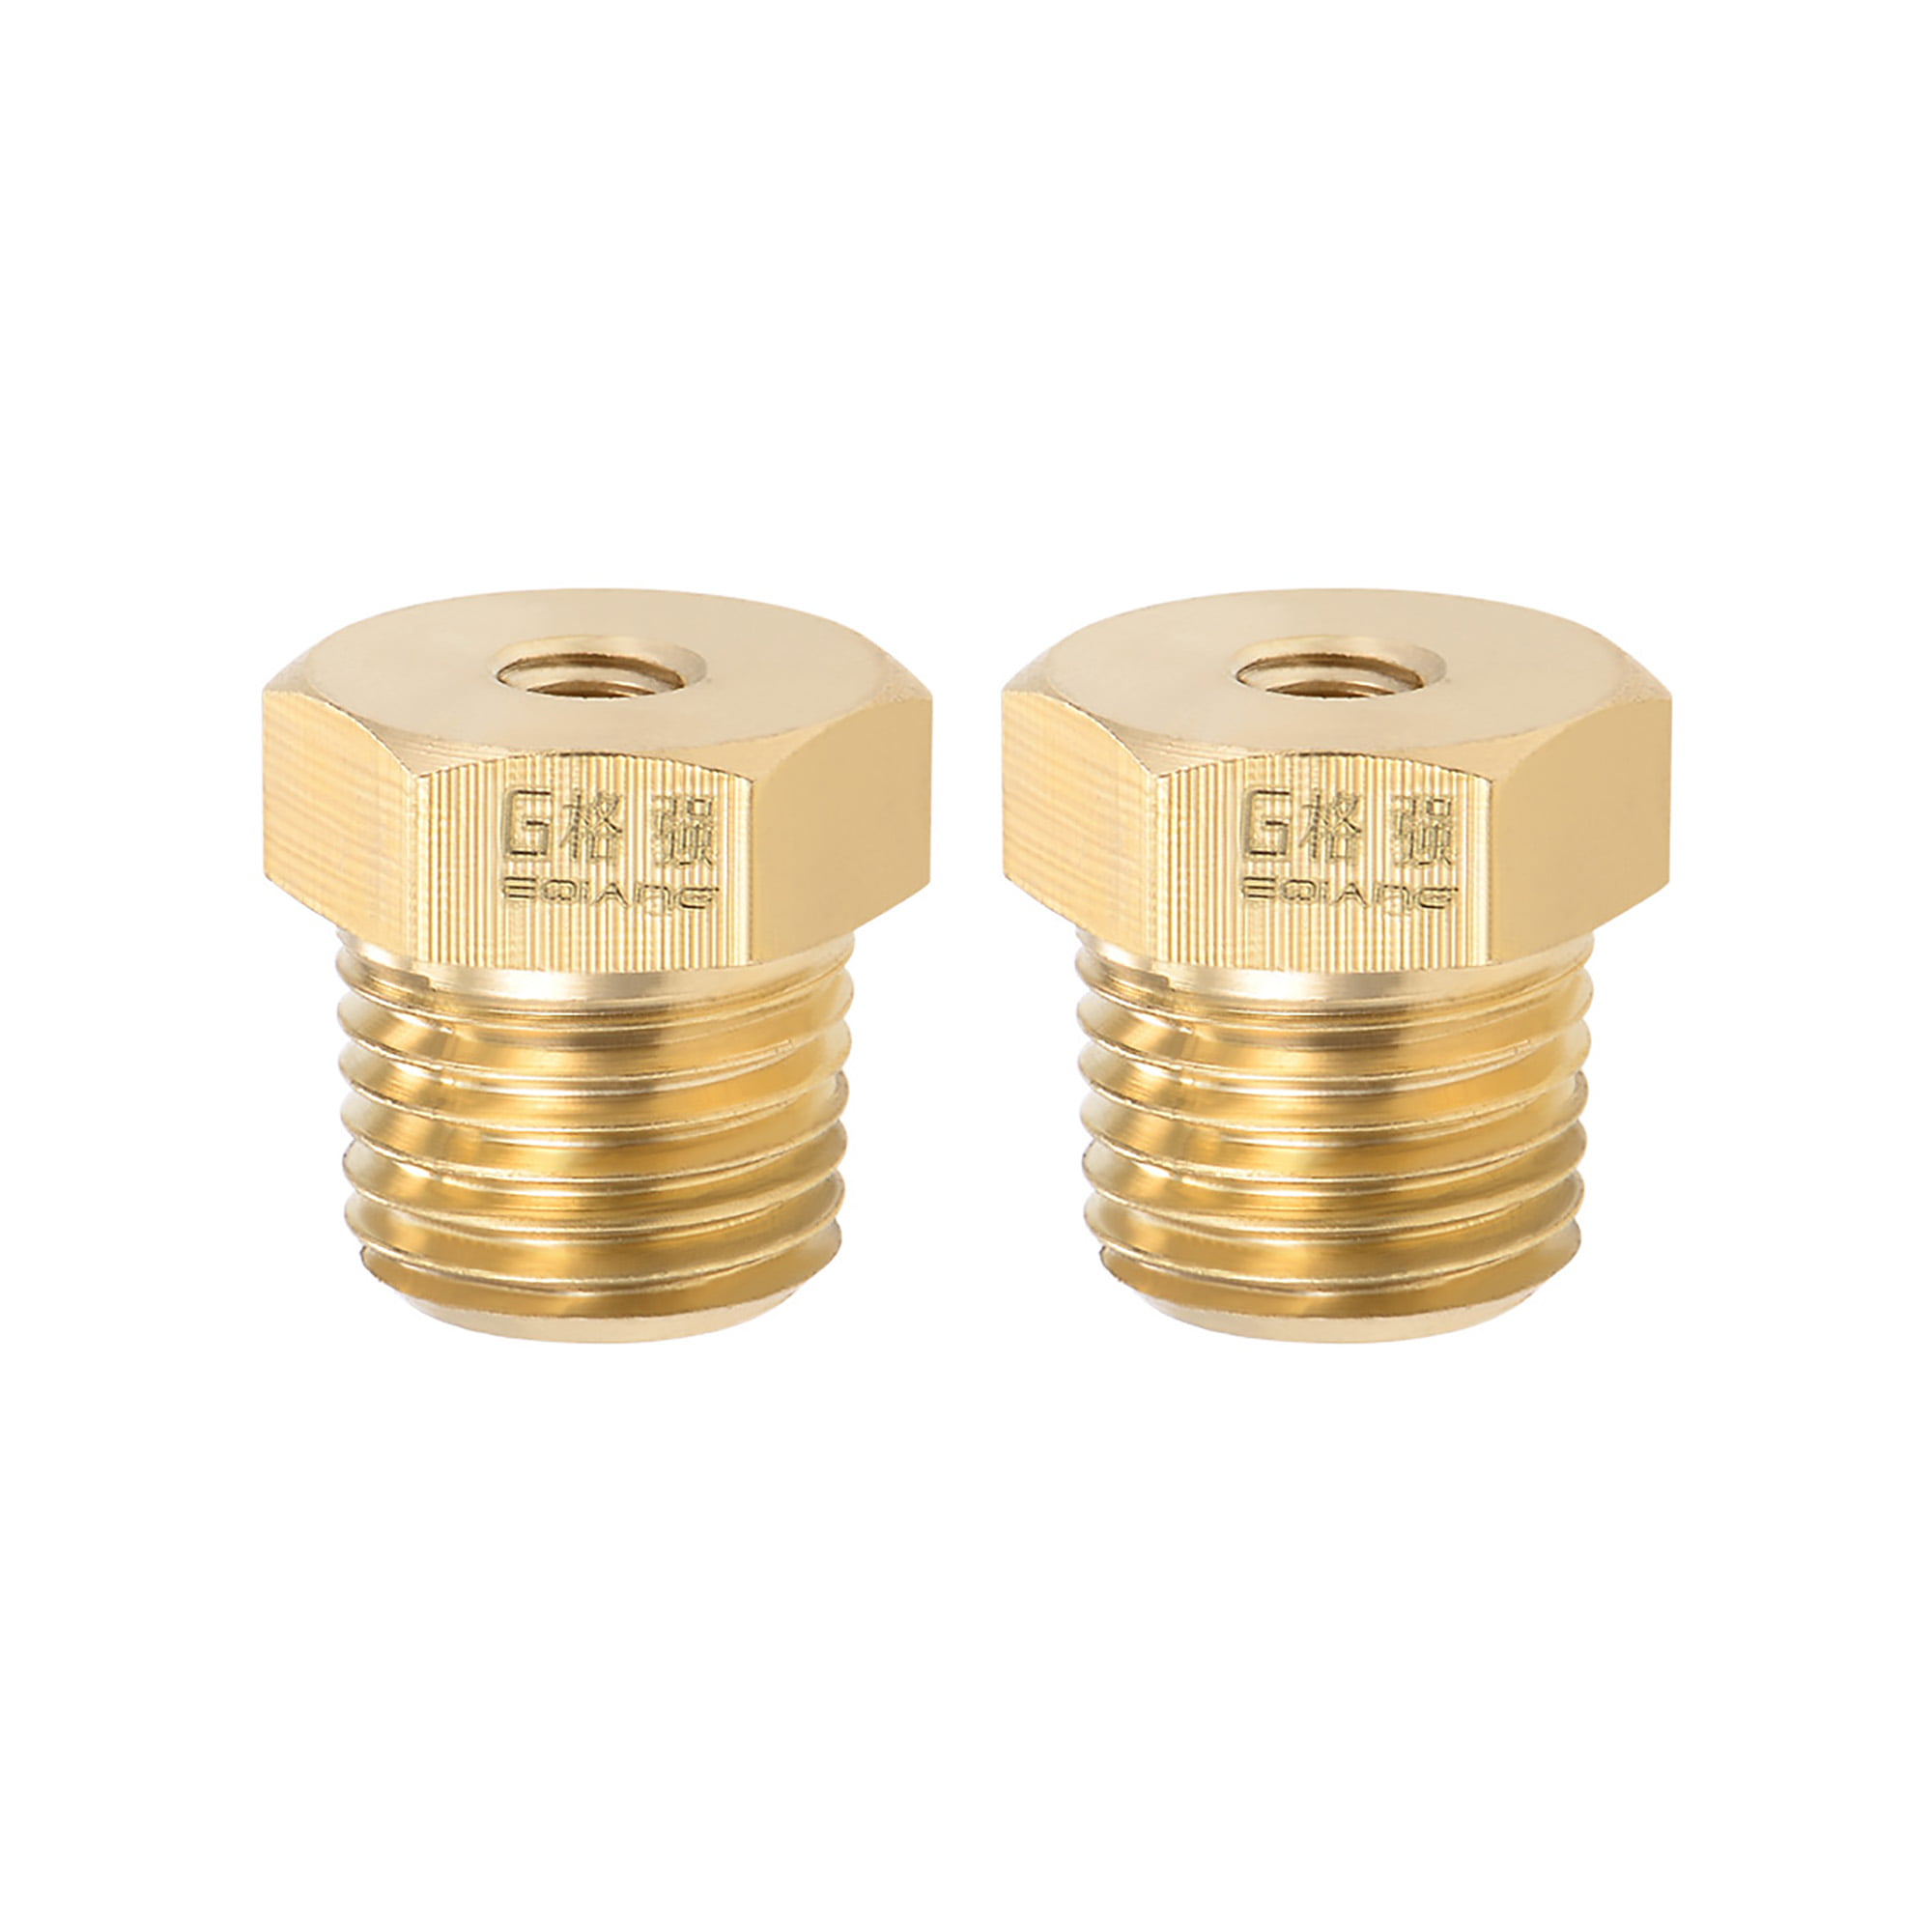 5/8" HOSE BARB X 3/4 MALE NPT Brass Pipe Fitting NPT Thread Gas Fuel Water 2PC 